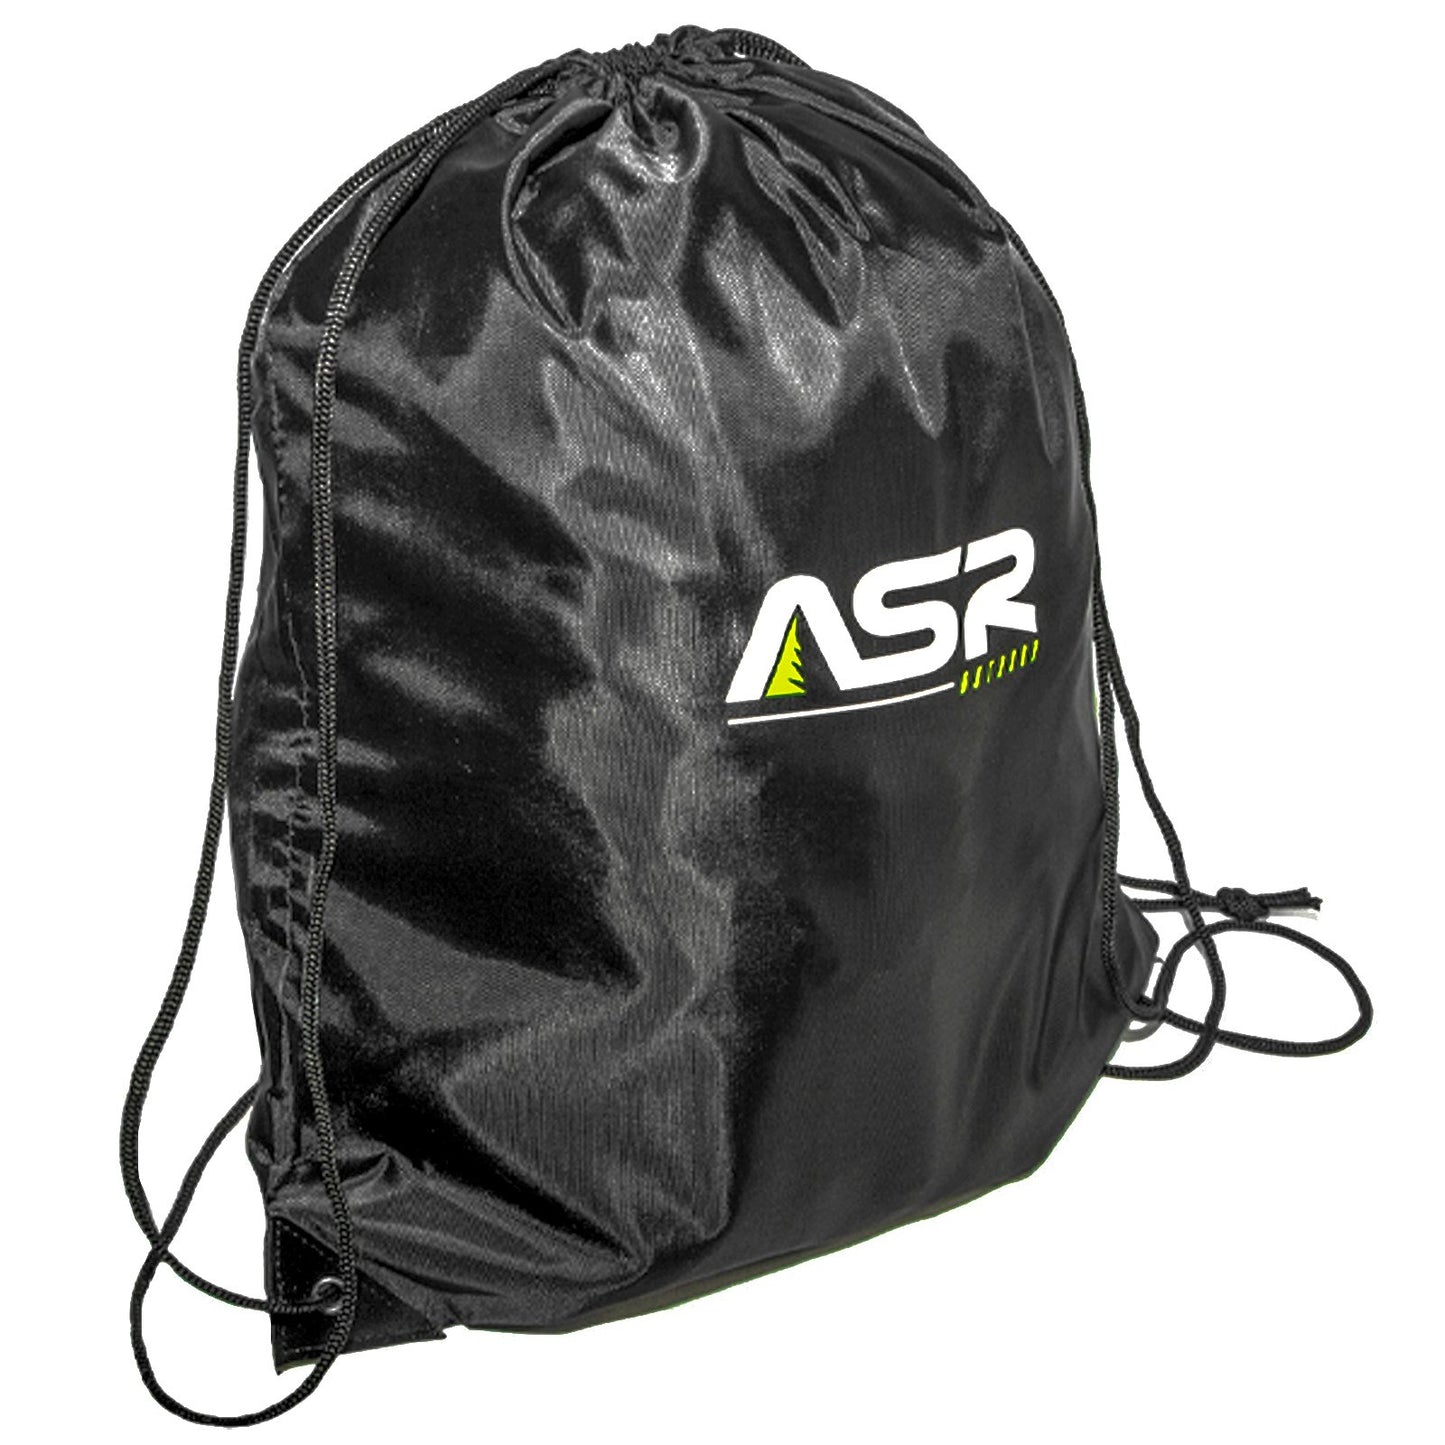 ASR Outdoor Black Drawstring Backpack Gym Bag Hiking Gear, 20 x 16 Inches